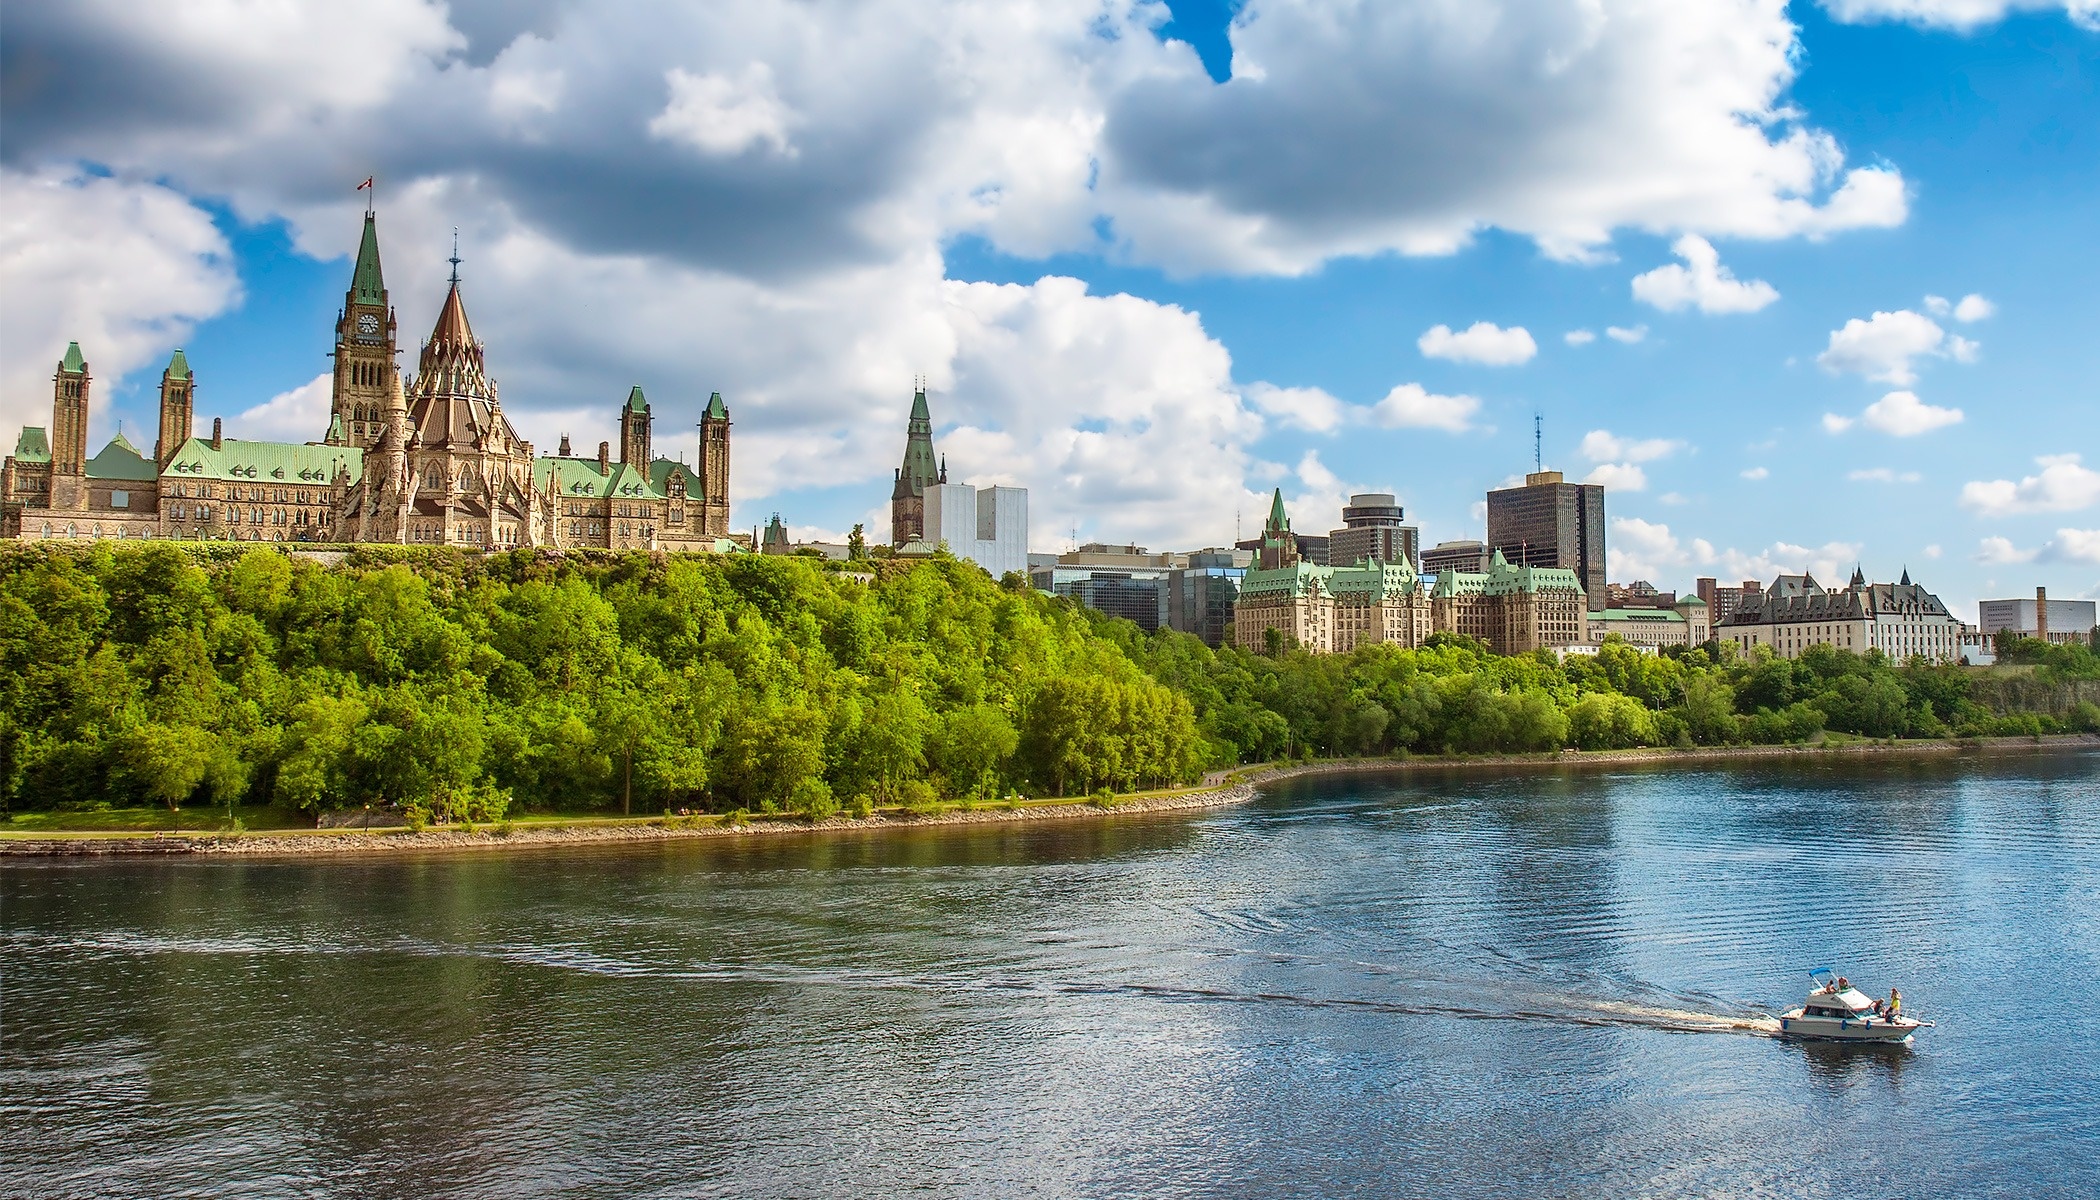 Jewish National Fund of Canada | We are the regional office of JNF Canada for Ottawa, serving Canada’s Capital Region on both sides of the Ottawa River. We look forward to meeting you at our 